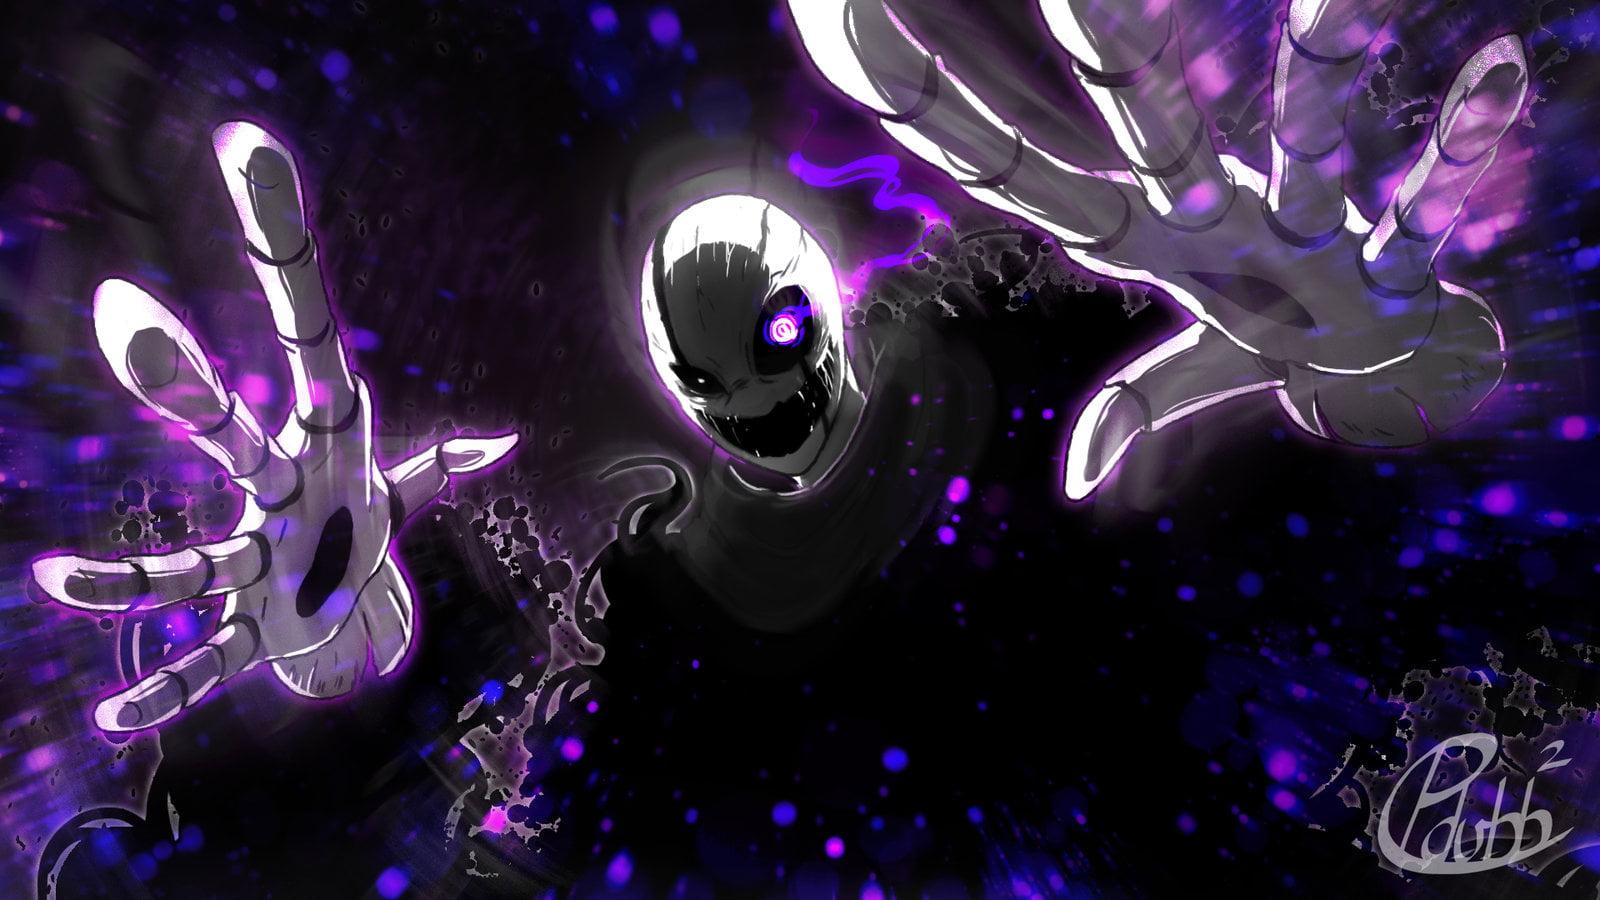 Anime character with black suit wallpaper, Undertale, W.D Gaster, indie games HD wallpaper